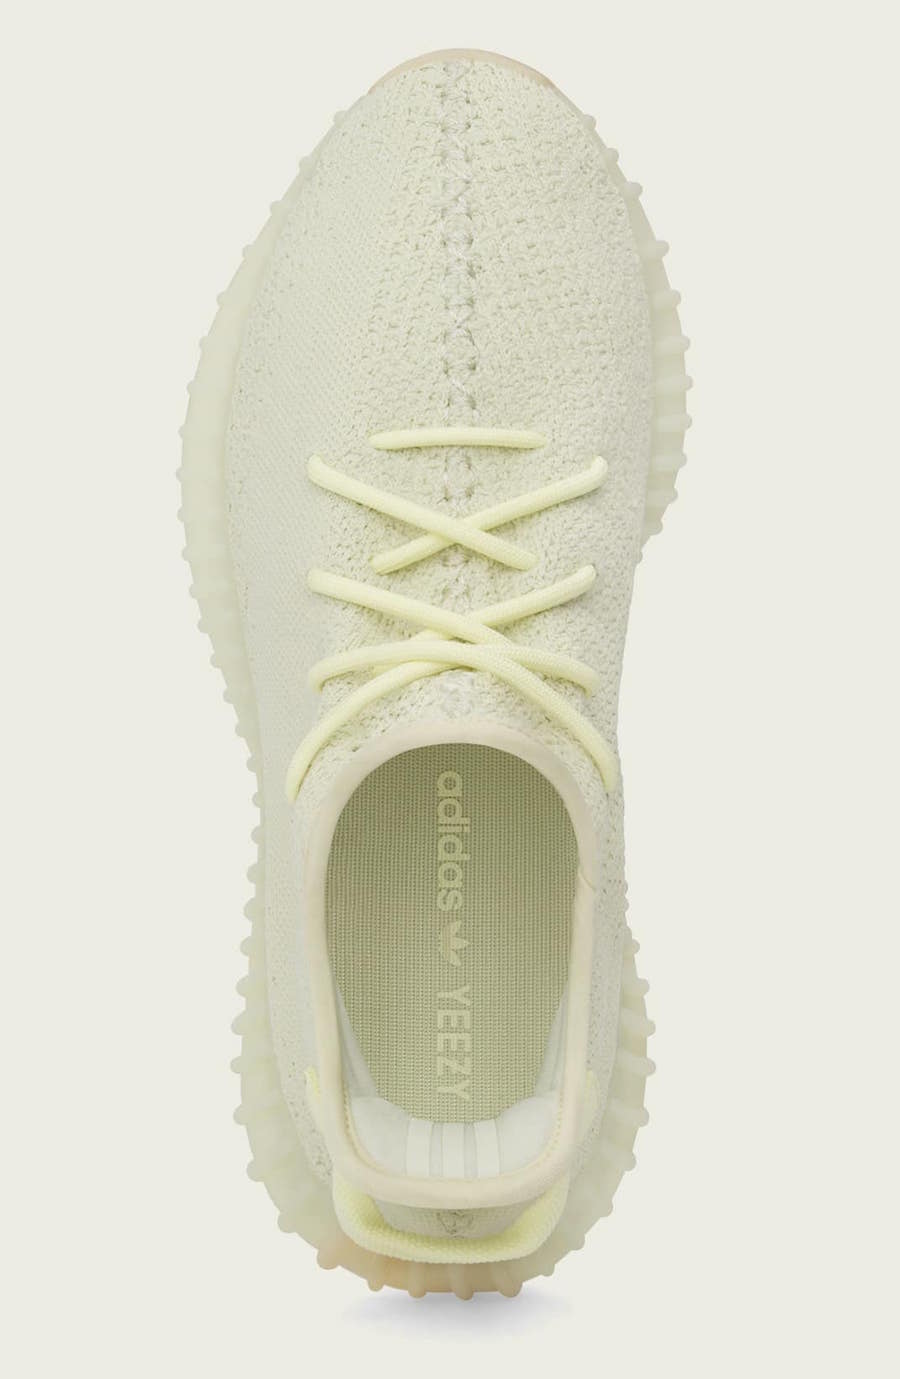 Adidas Yeezy Boost 350 V2 Butter Release Date F36980 Top Insole